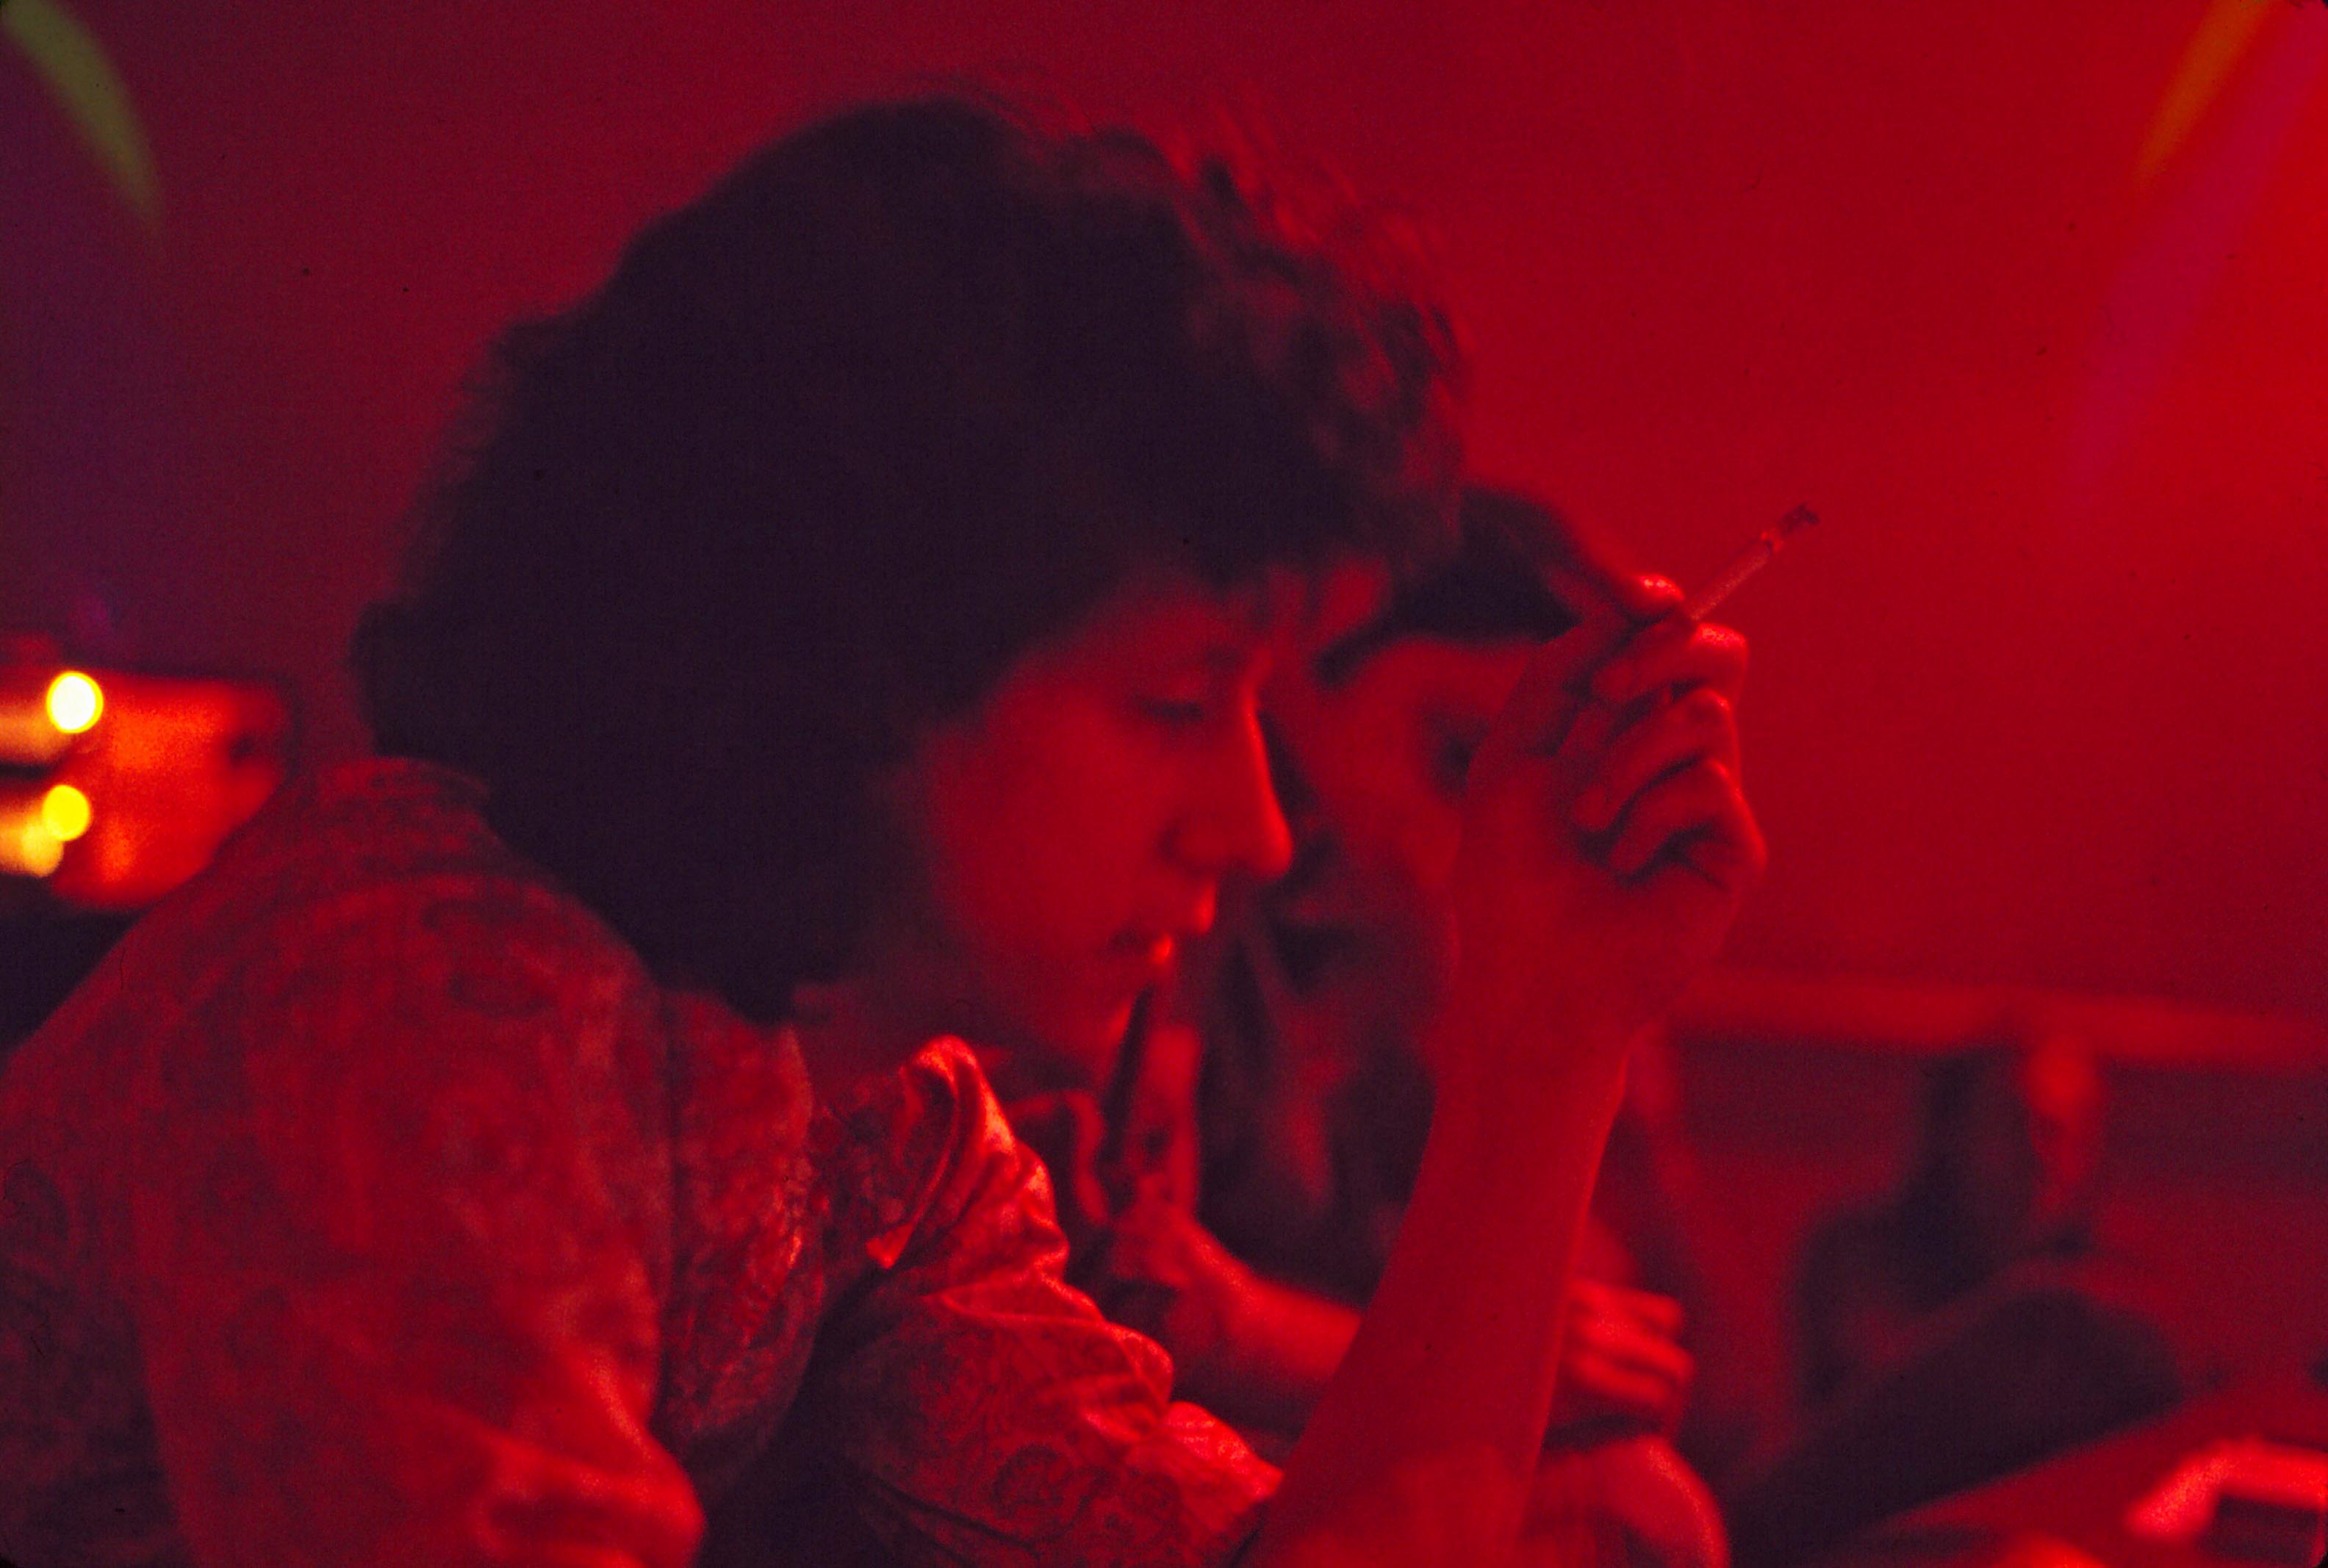 Arlo Guthrie with cigarette (under red light) working at Sunwest Studio